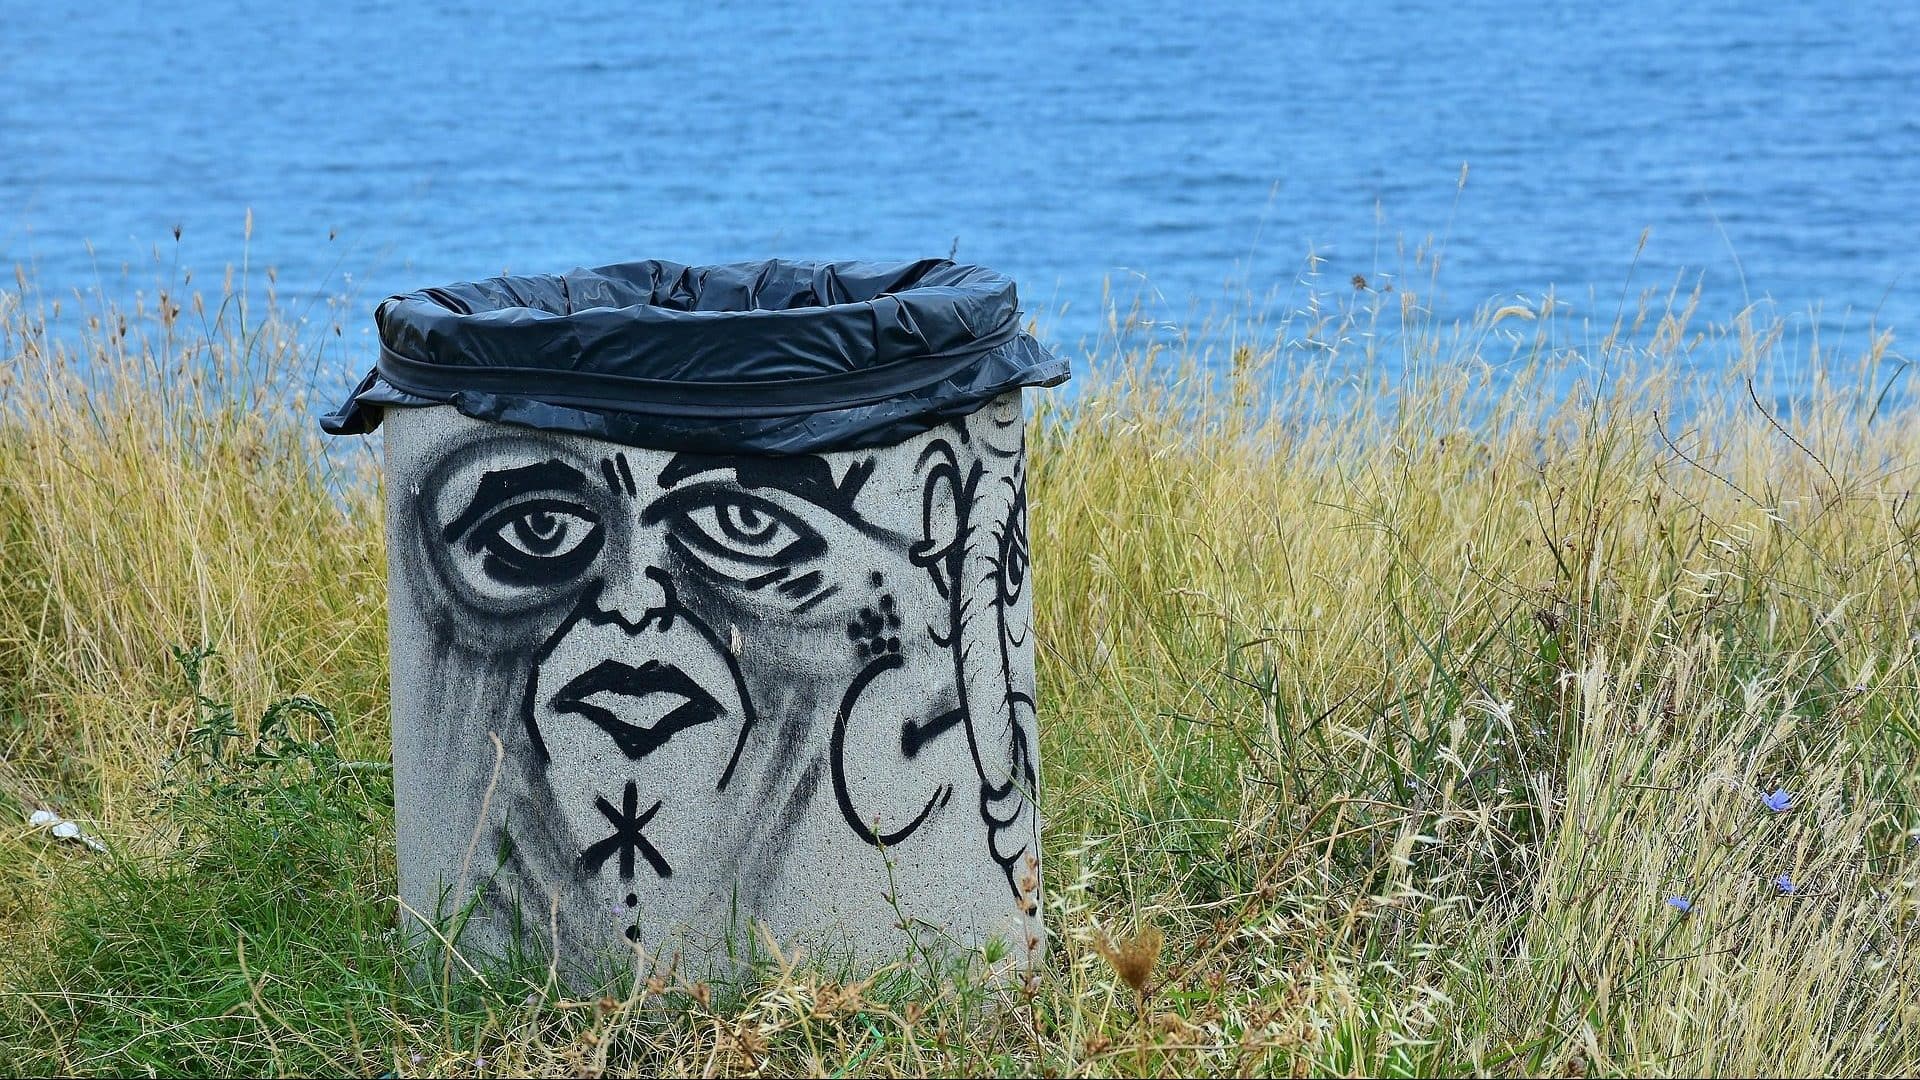 Image: Graffiti face on a garbage can